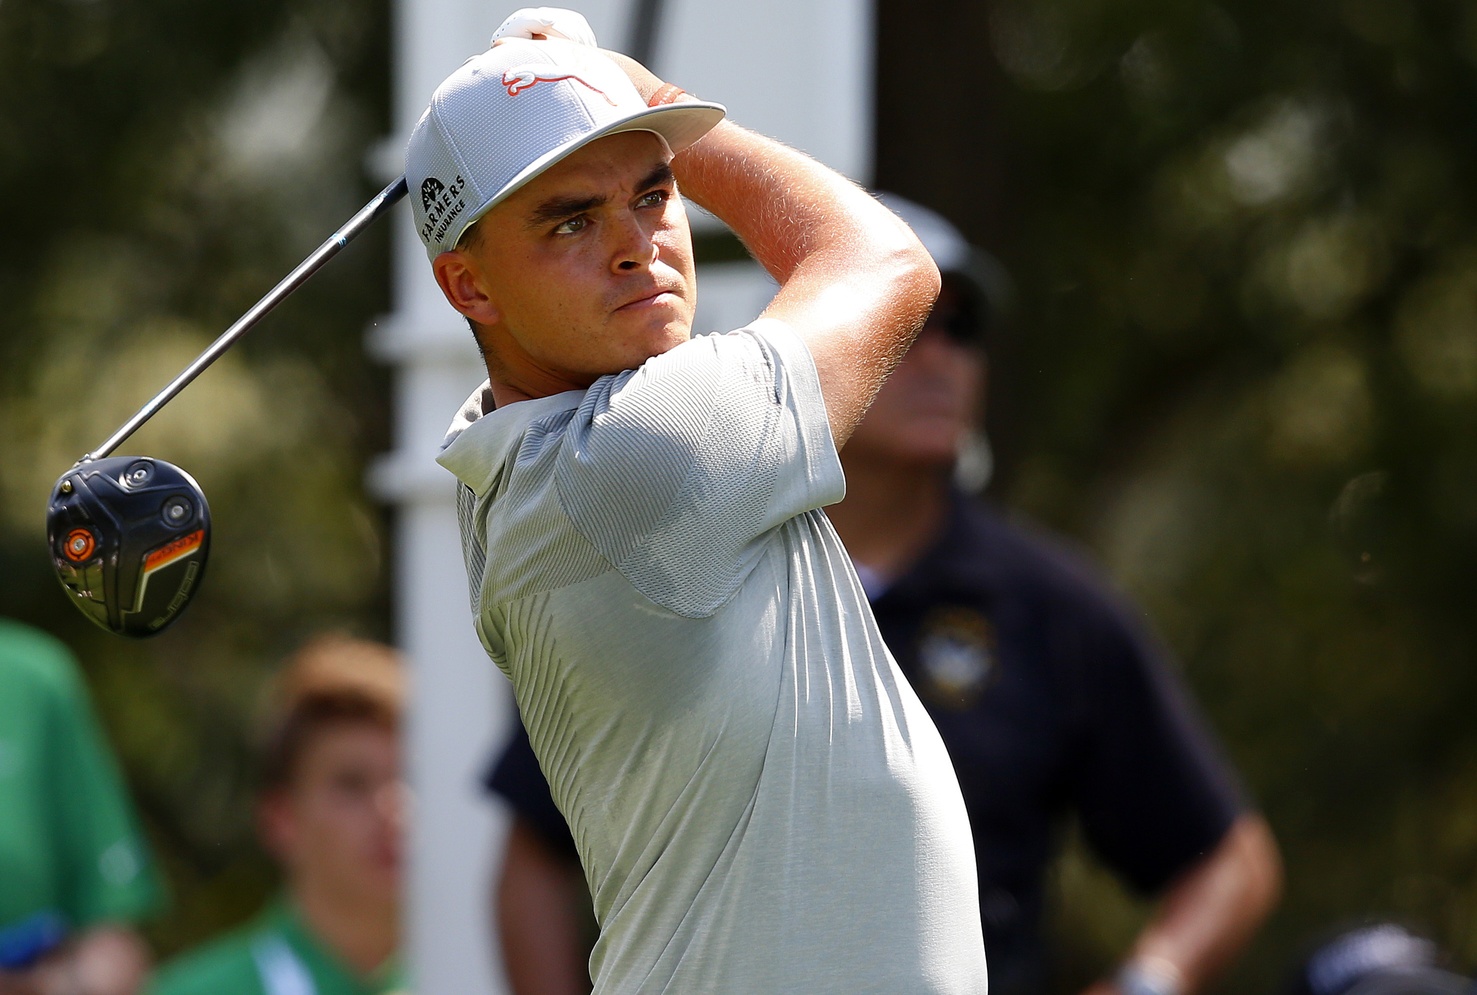 OHL Classic: Fowler still favored with Kizzire, Rodgers close behind article feature image